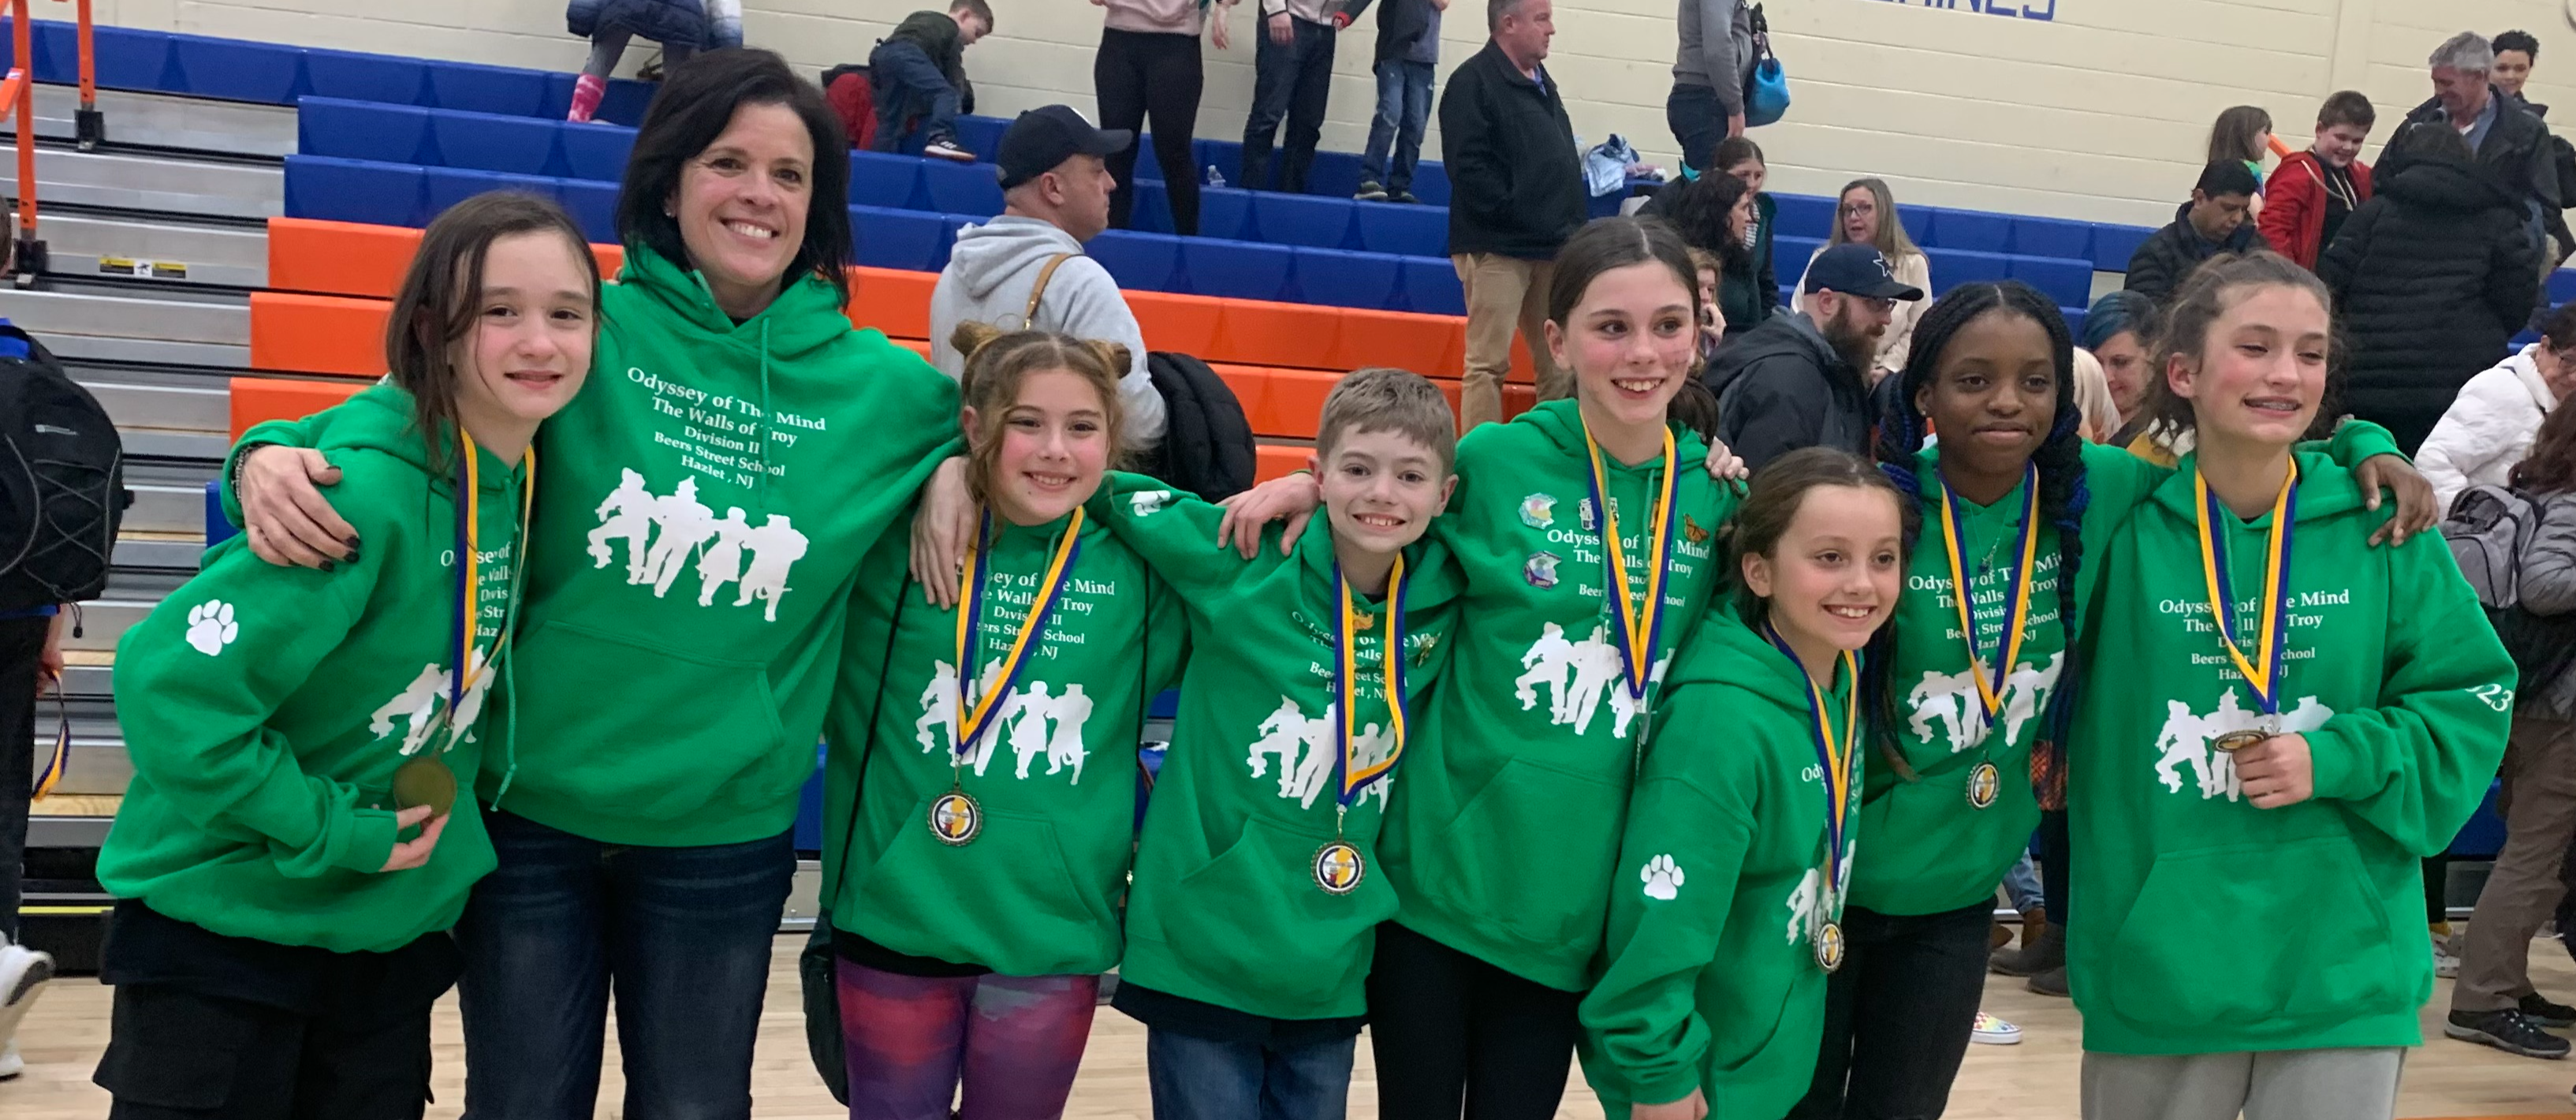 Odyssey of the Mind Team Takes 1st Place